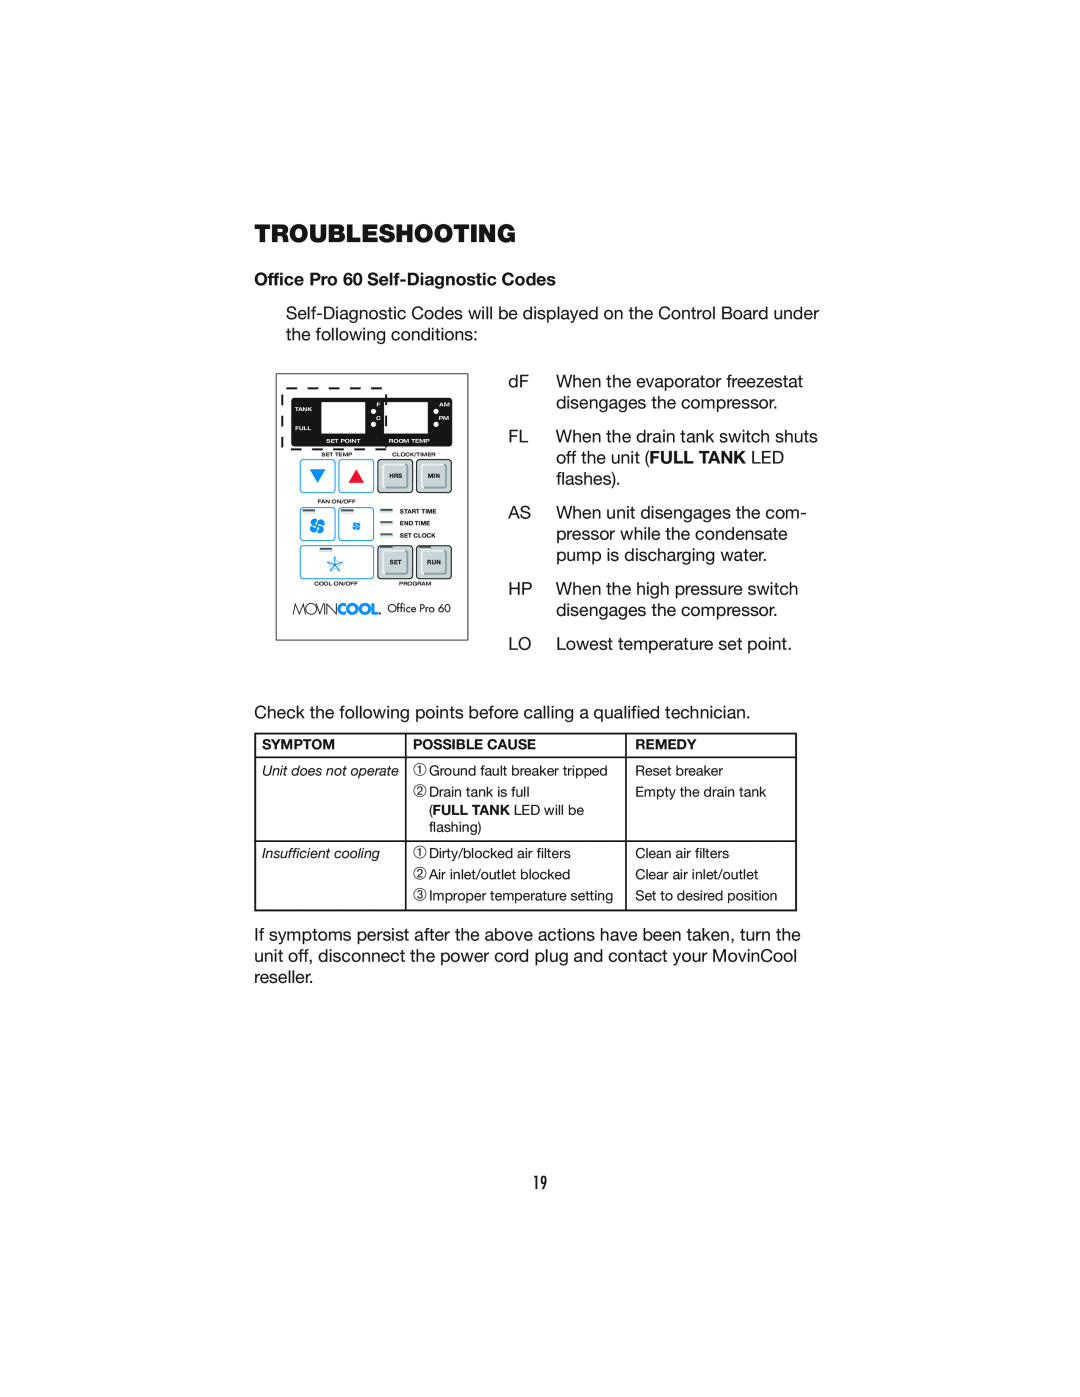 Denso PRO 60 operation manual Troubleshooting, Office Pro 60 Self-DiagnosticCodes 